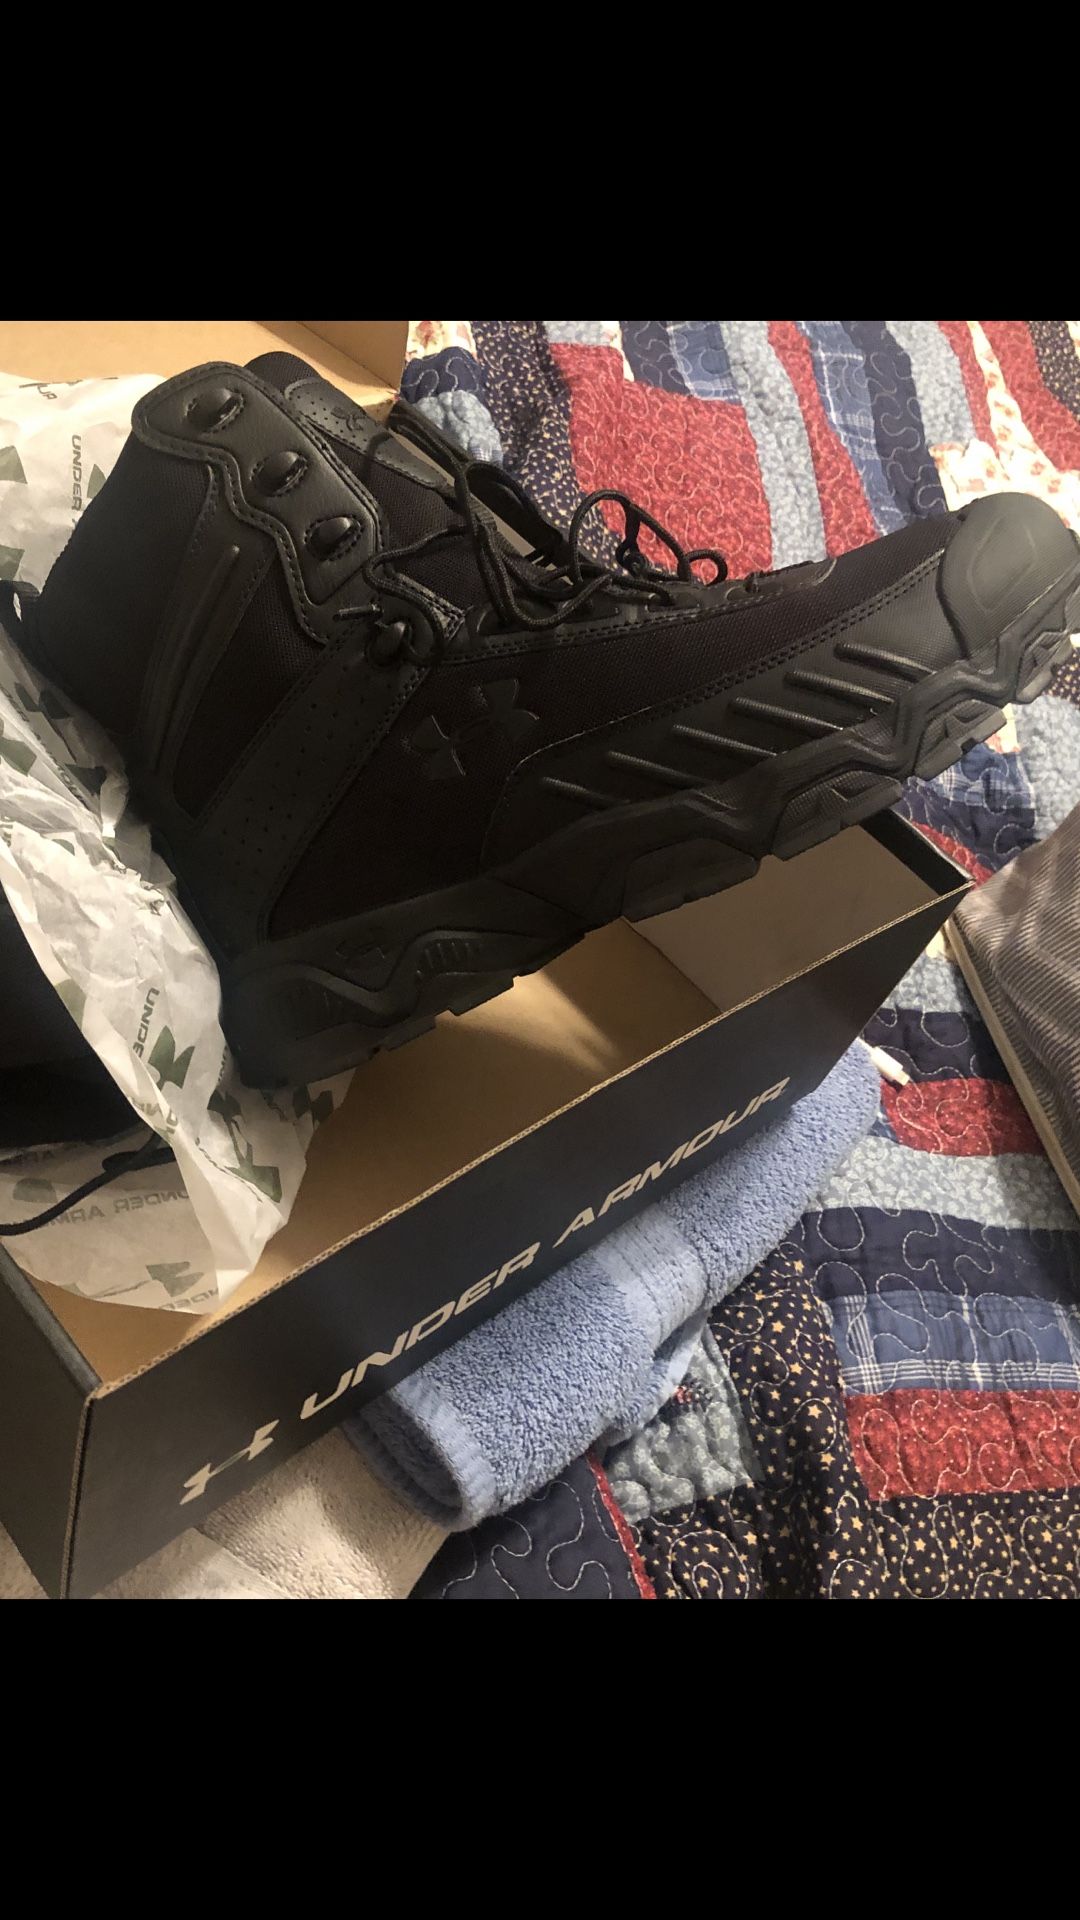 Brand new Under Armor Boots size 13